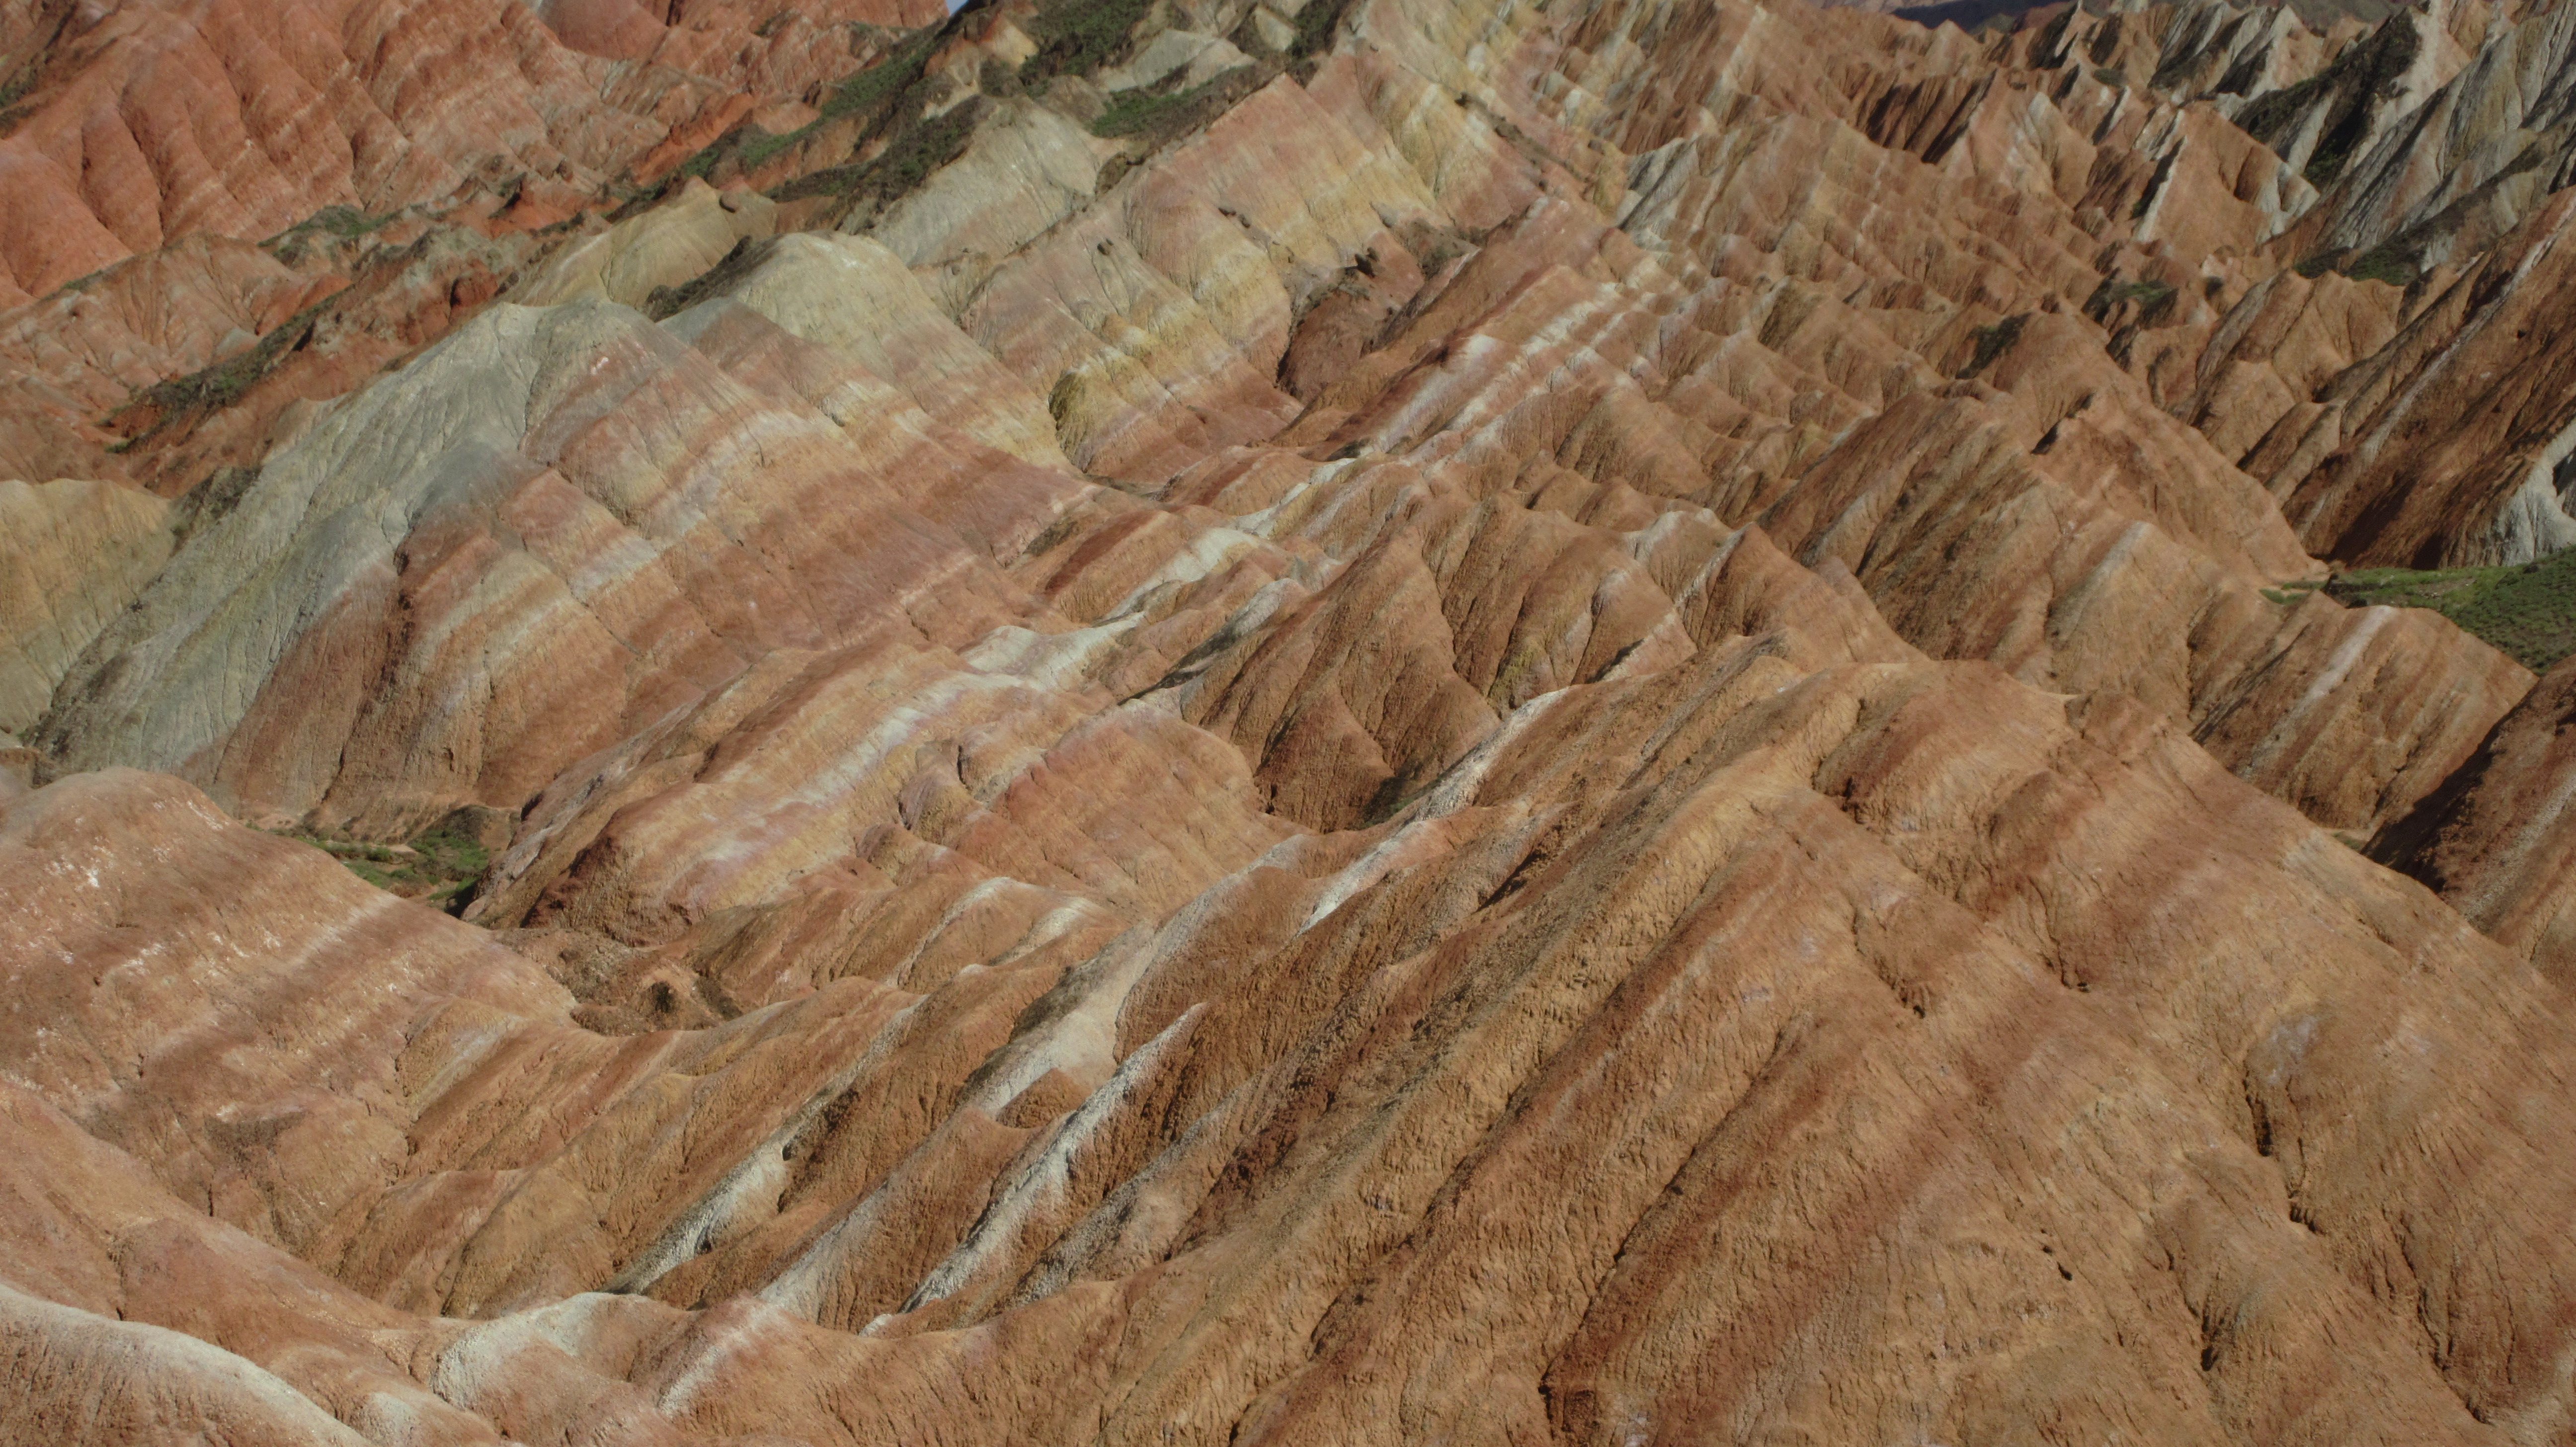 RAINBOW STRIPS. The mountains are lined with multiple colors, creating a rainbow-like surface.
 